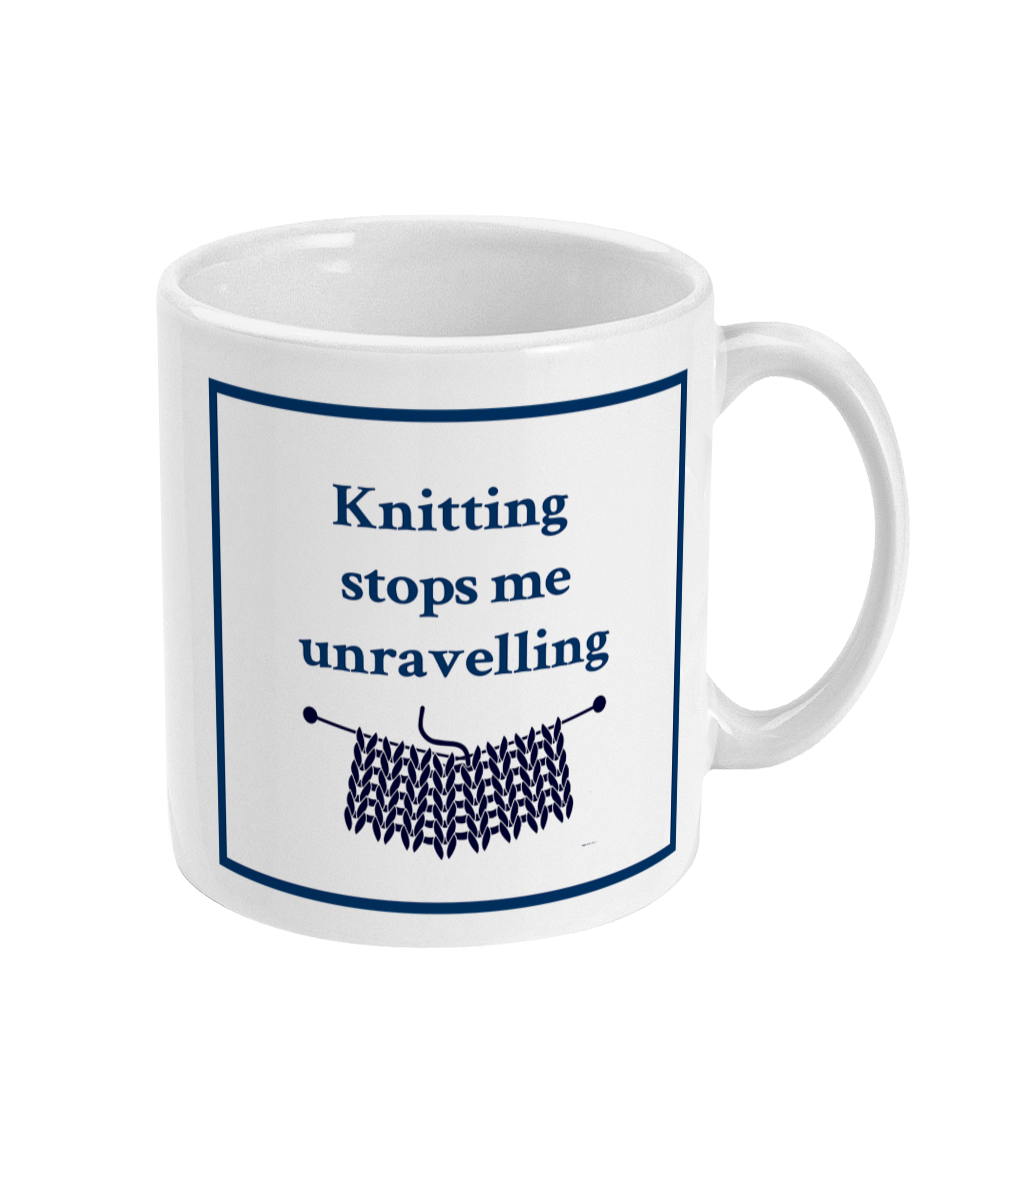 knitting stops me unravelling mug with text and an image of knitting